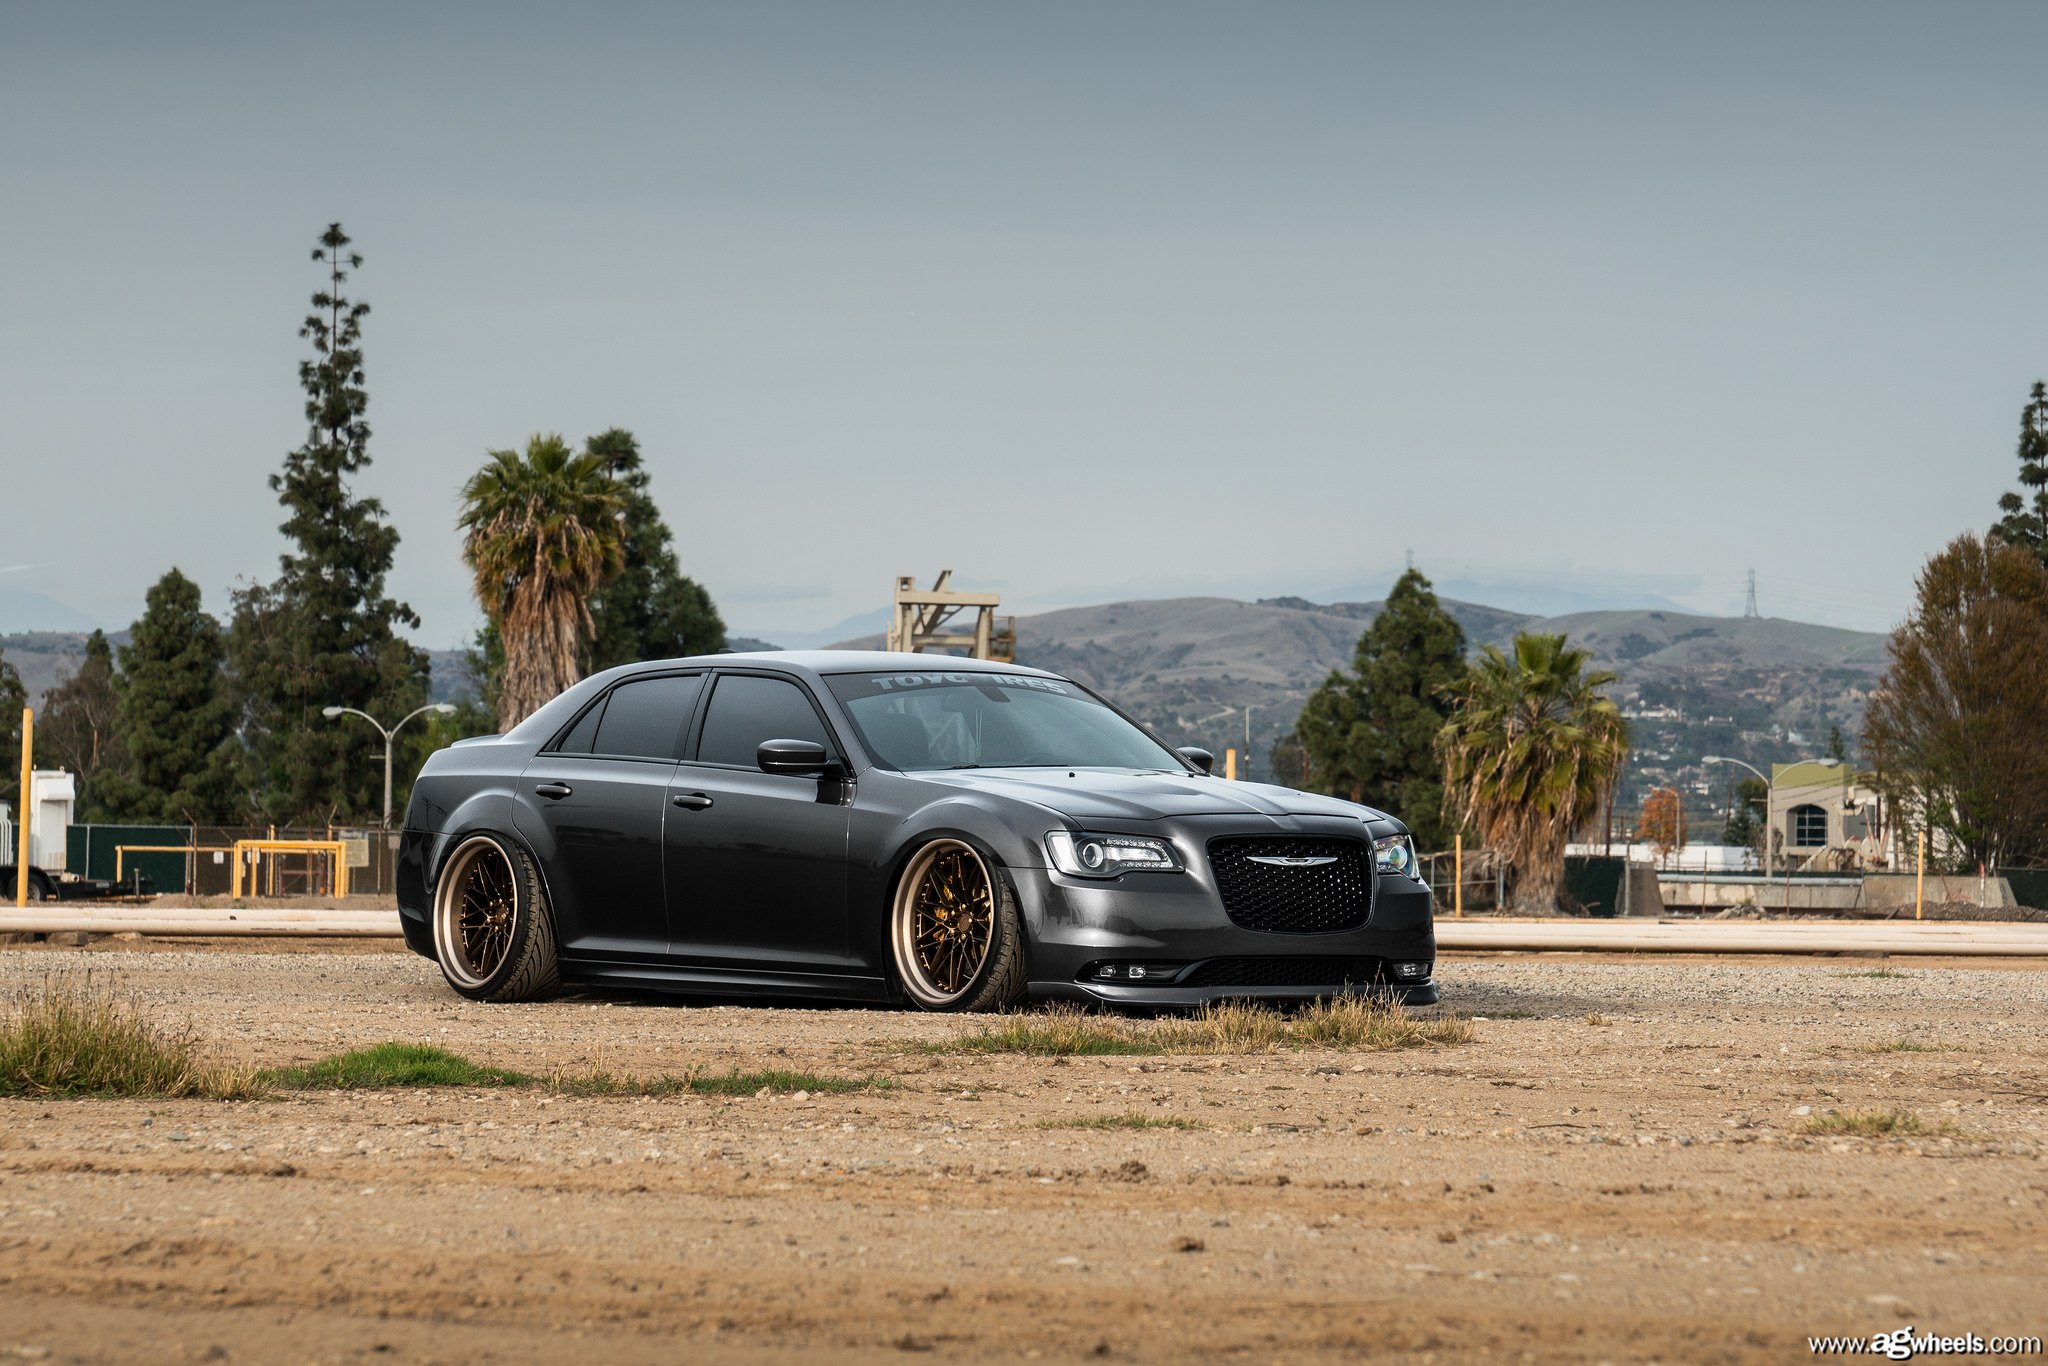 Blacked Out Mesh Grille on Gray Chrysler 300 - Photo by Avant Garde Wheels